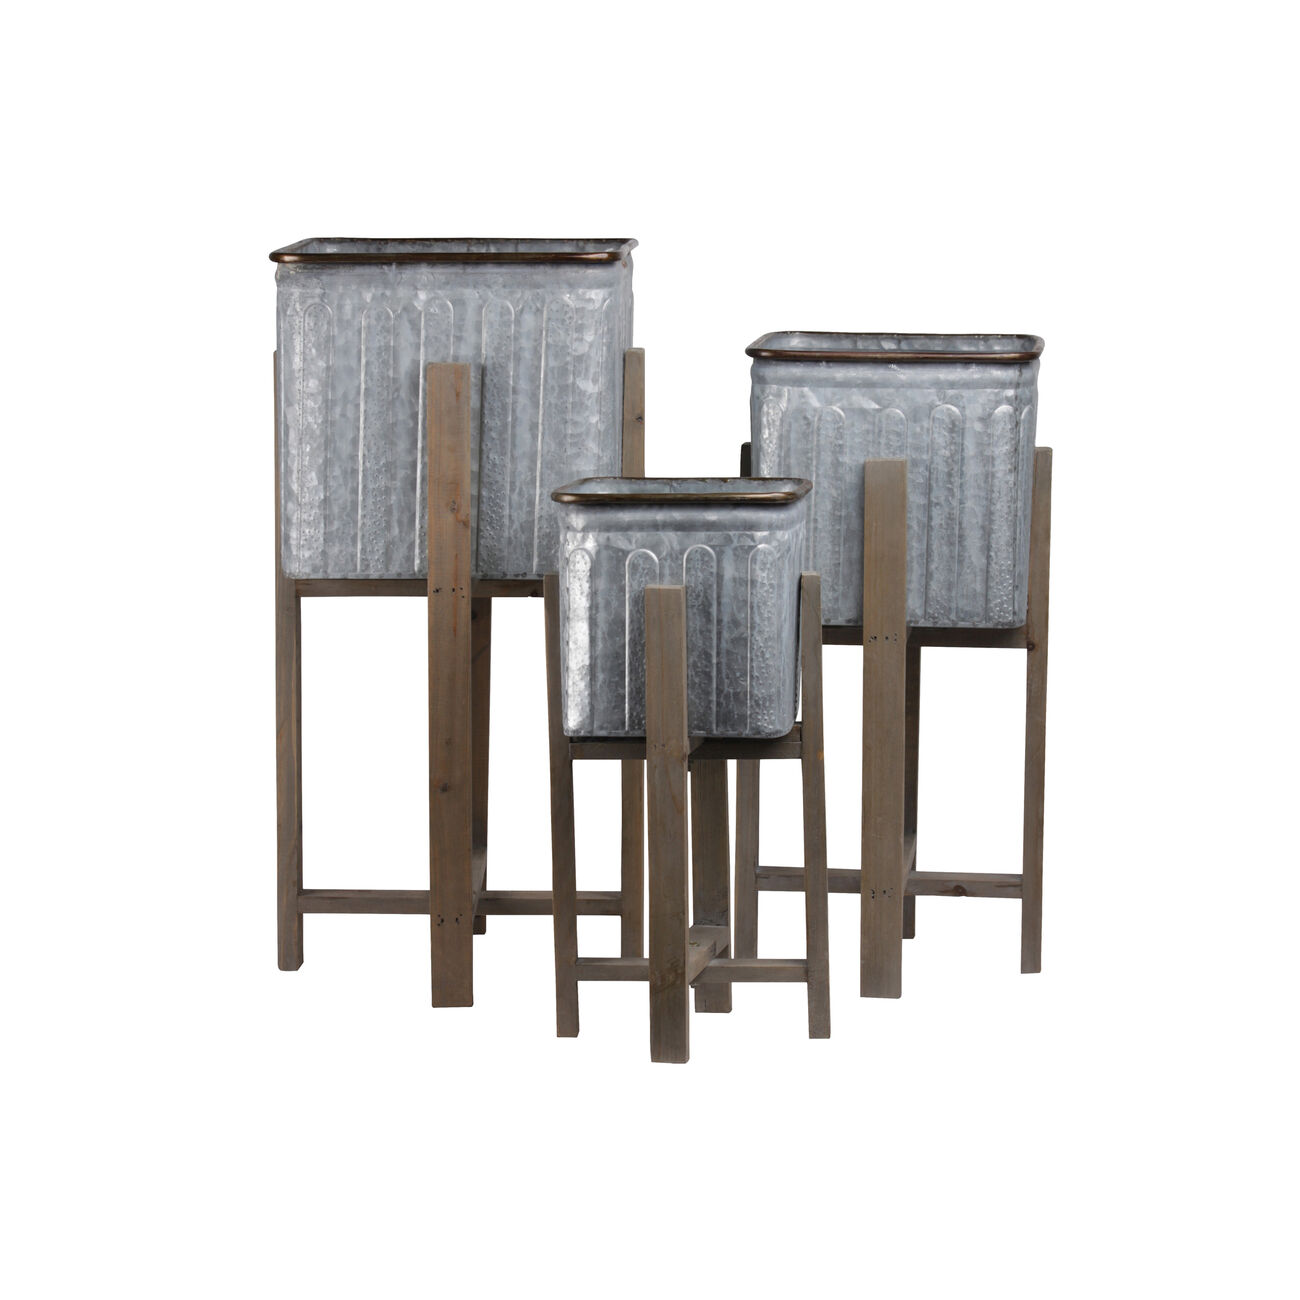 3 Piece Square Vented Design Metal Planters with Copper Rim, Gray and Brown